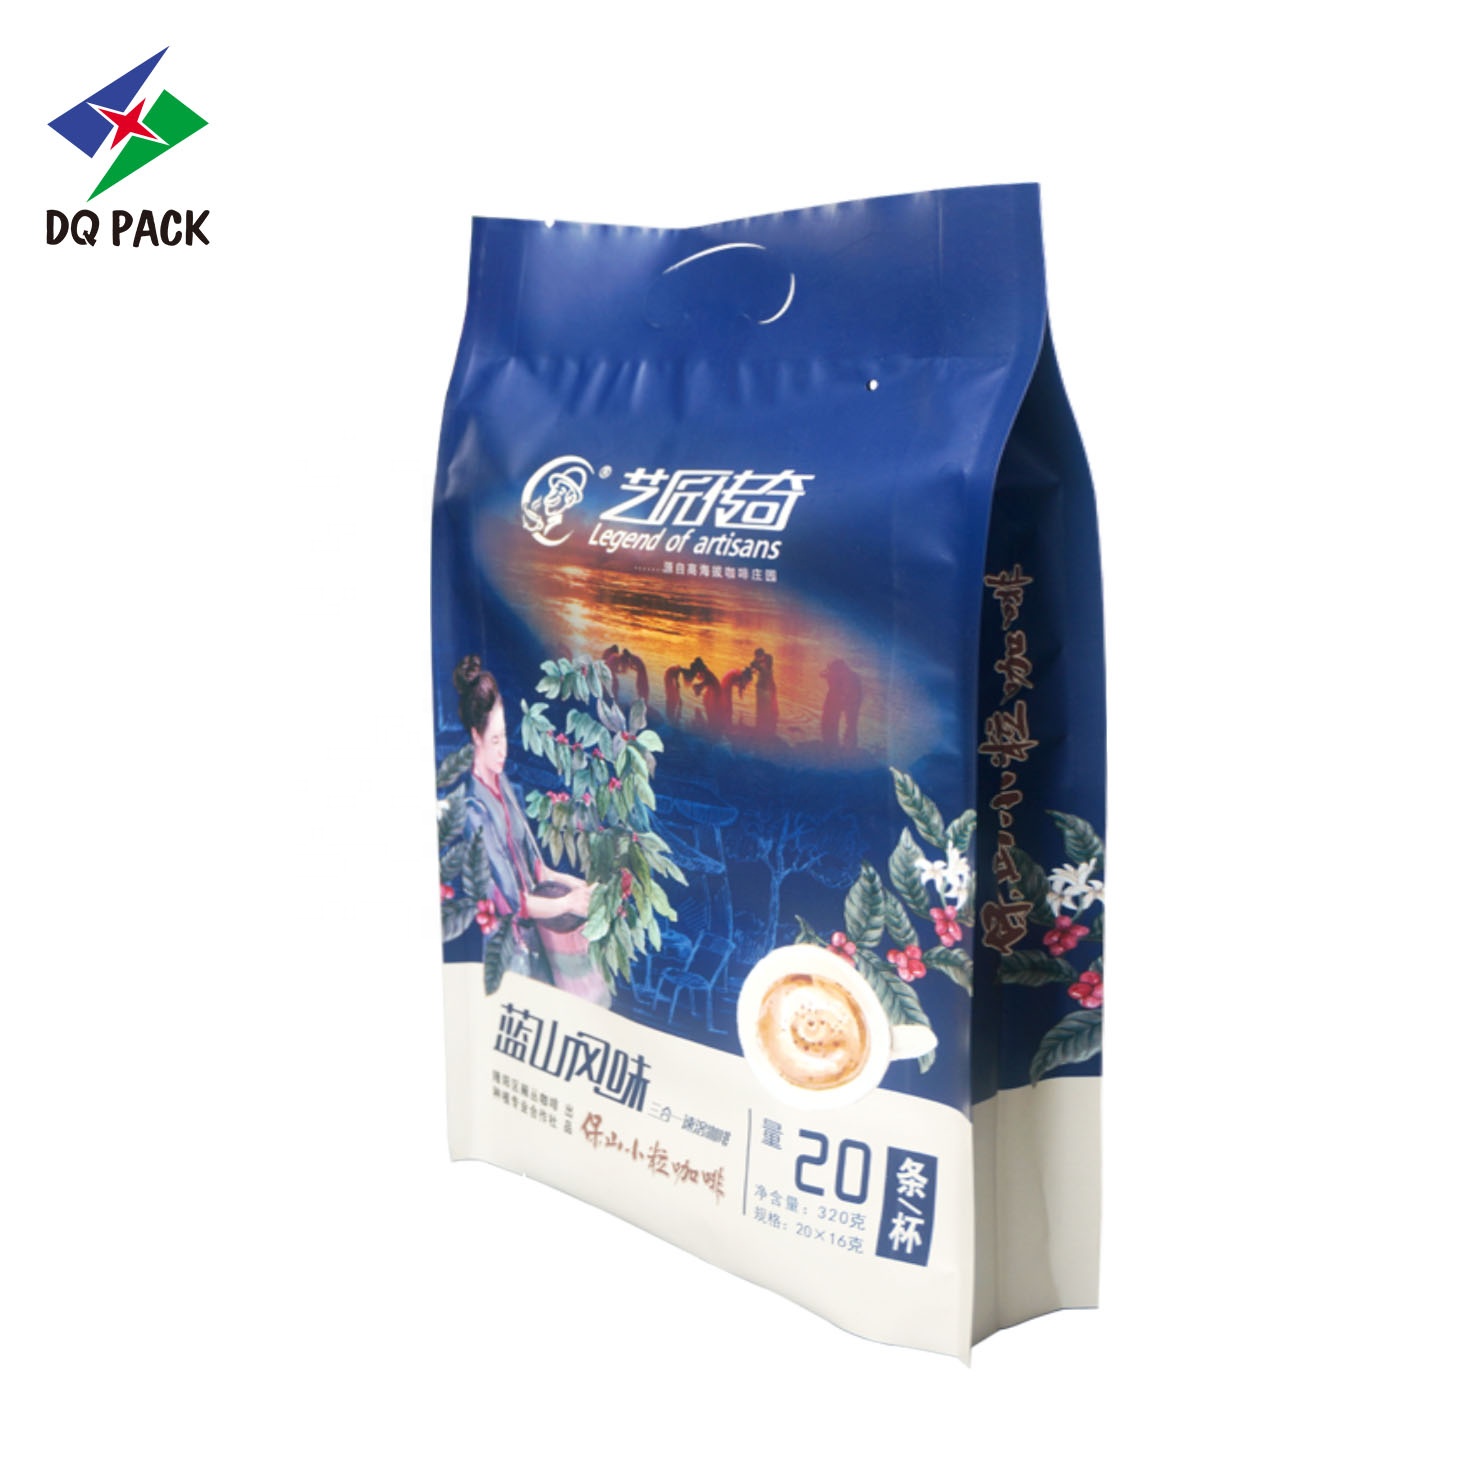 DQ PACK Custom Printed Coffee Bag 4 Sides Heat Seal Bag with Side Gusset Aluminum Foil